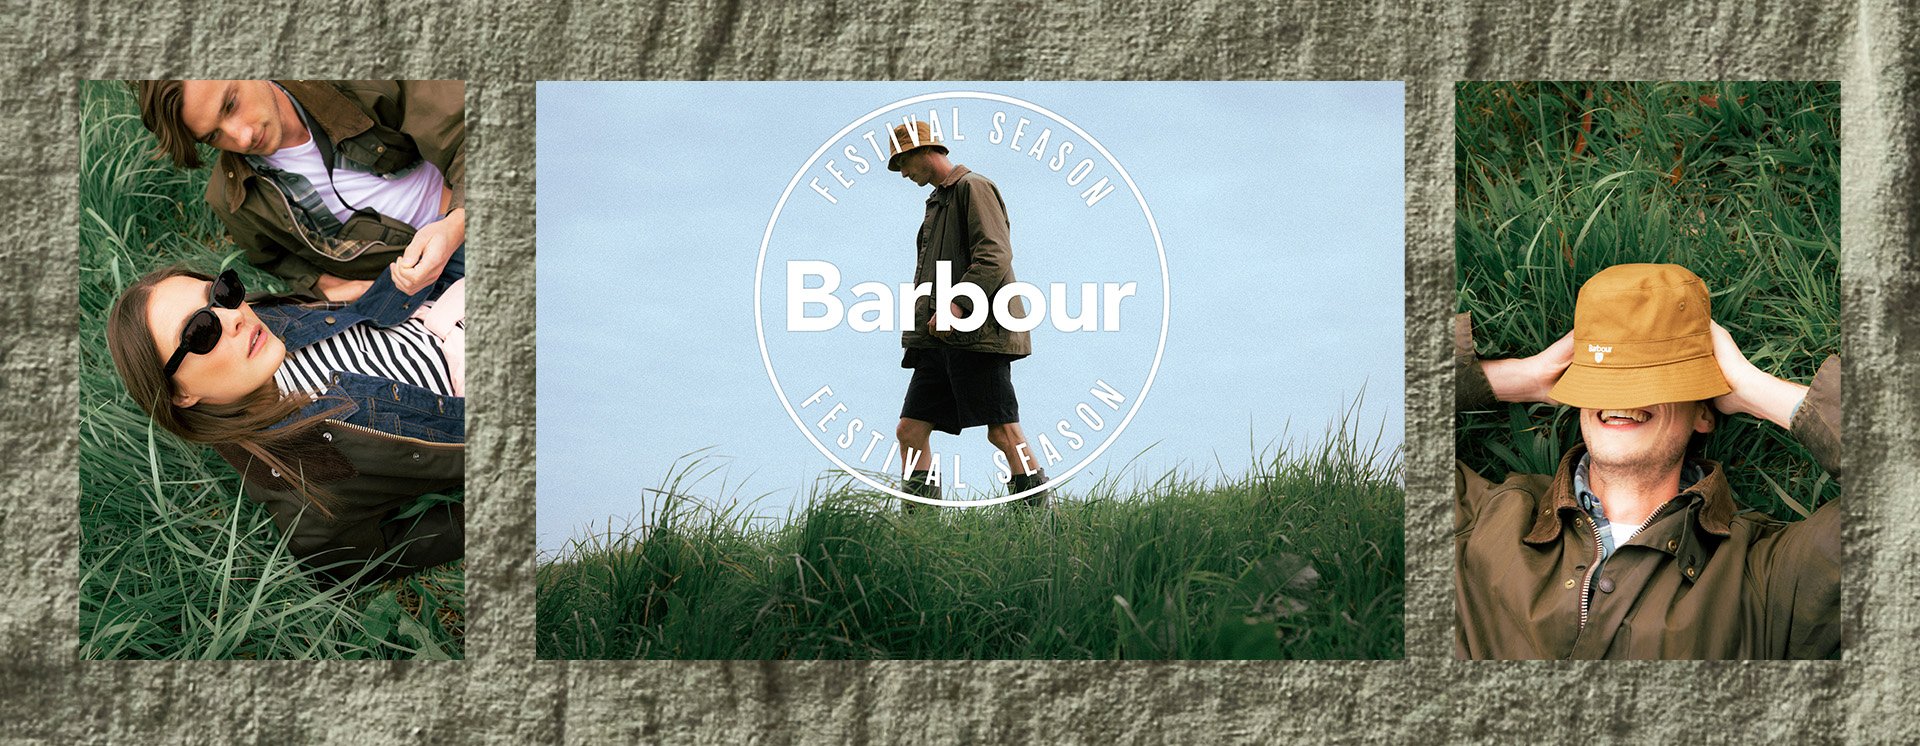 Model wears clothing from the Barbour Festival Shop